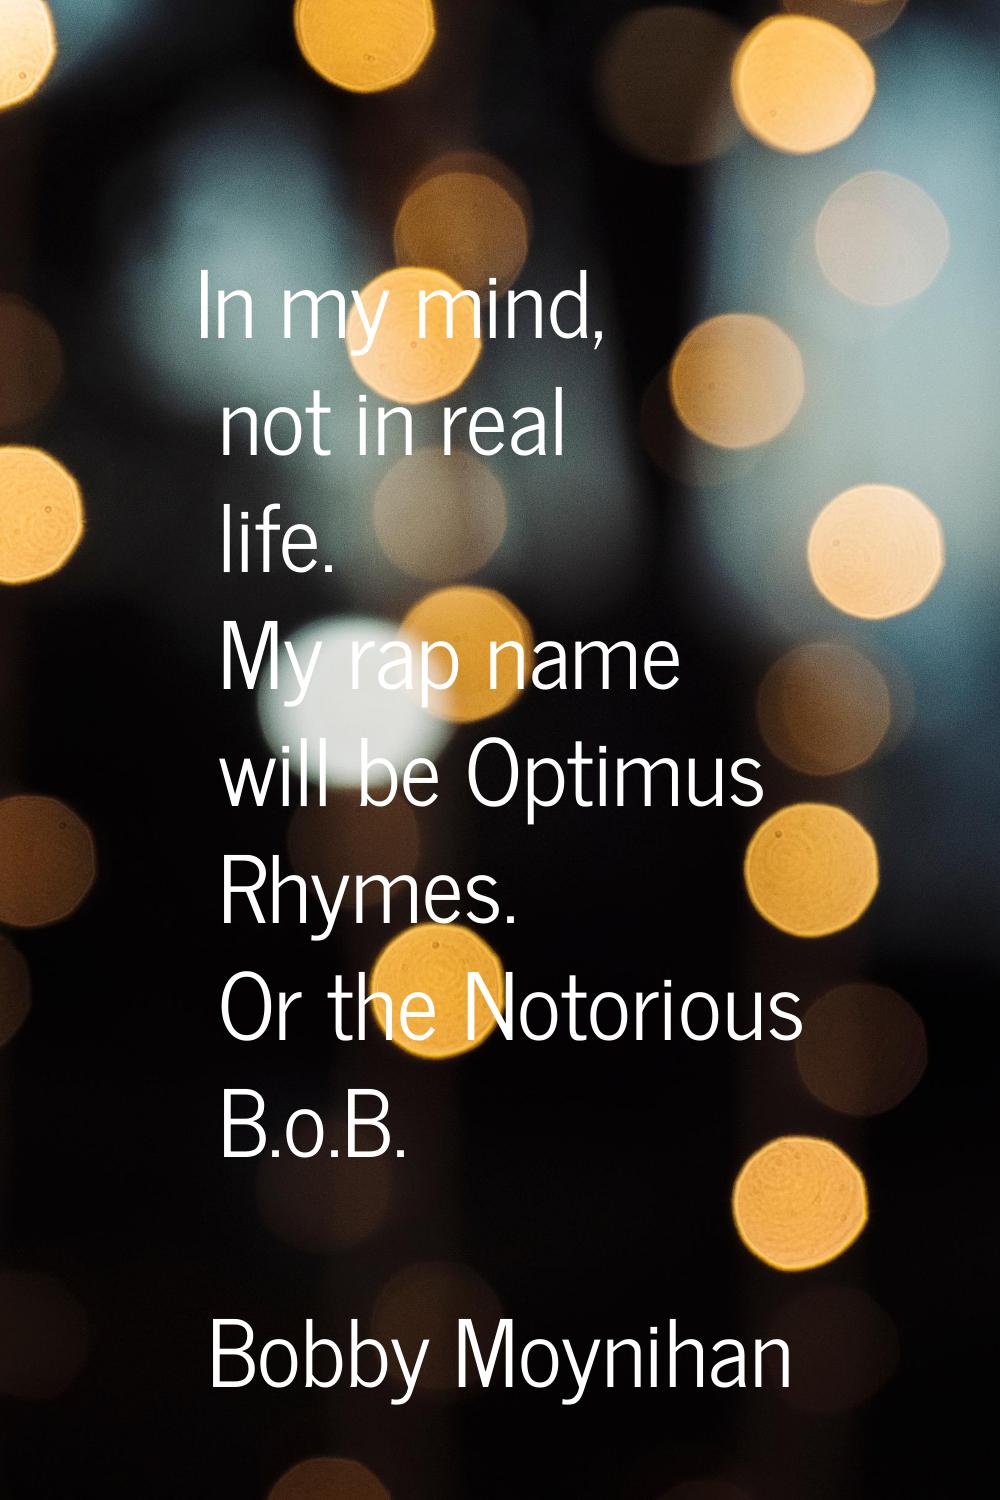 In my mind, not in real life. My rap name will be Optimus Rhymes. Or the Notorious B.o.B.